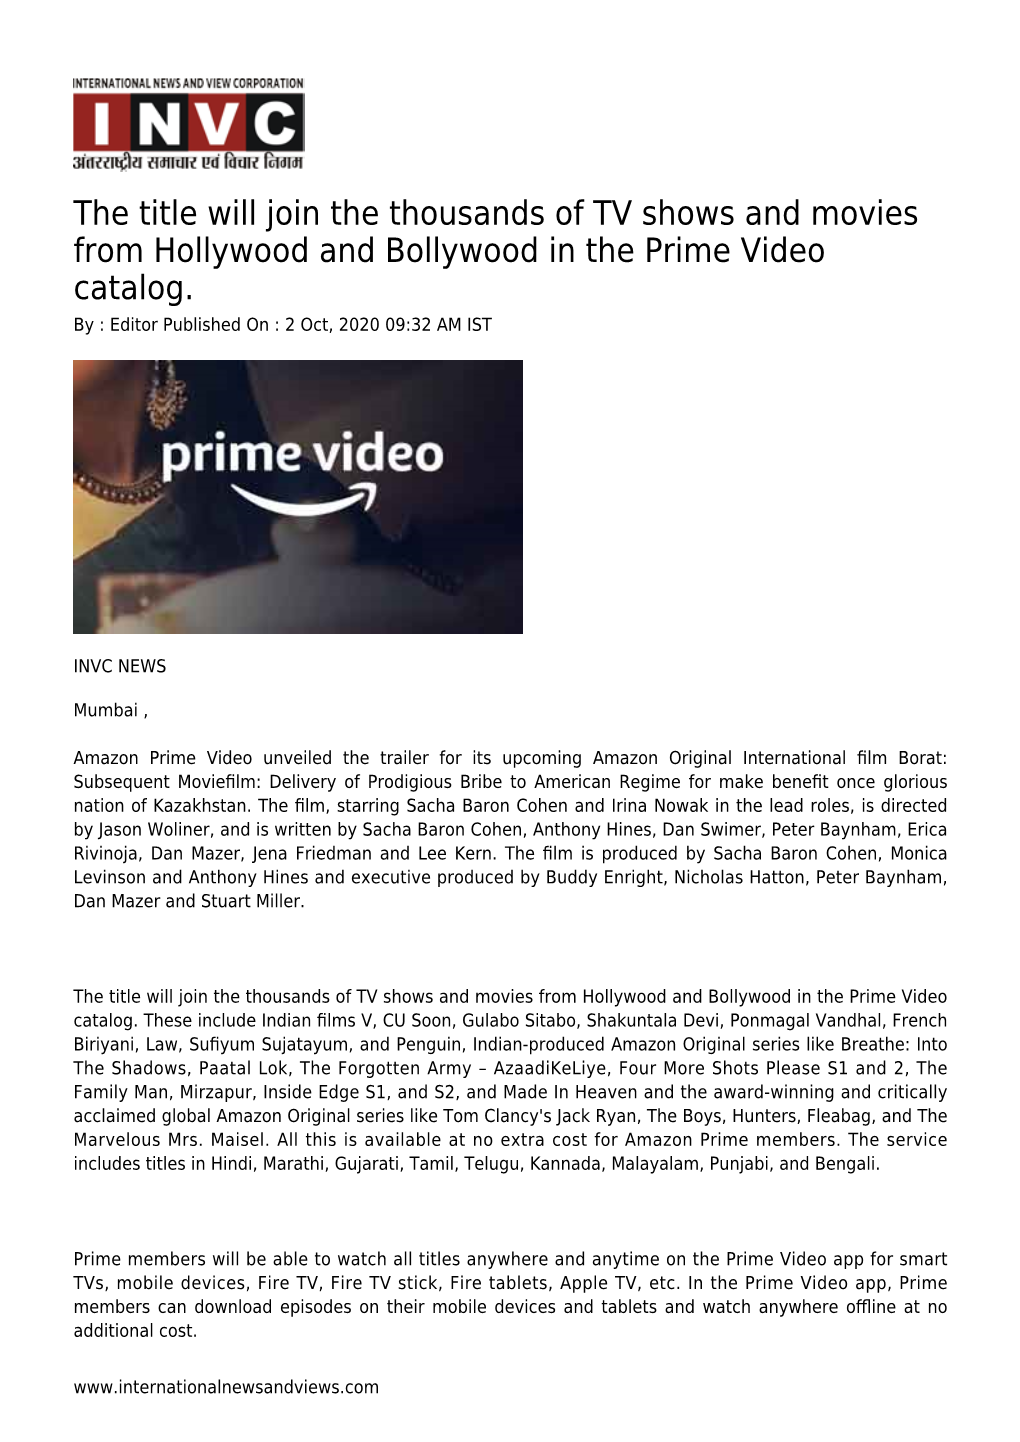 The Title Will Join the Thousands of TV Shows and Movies from Hollywood and Bollywood in the Prime Video Catalog